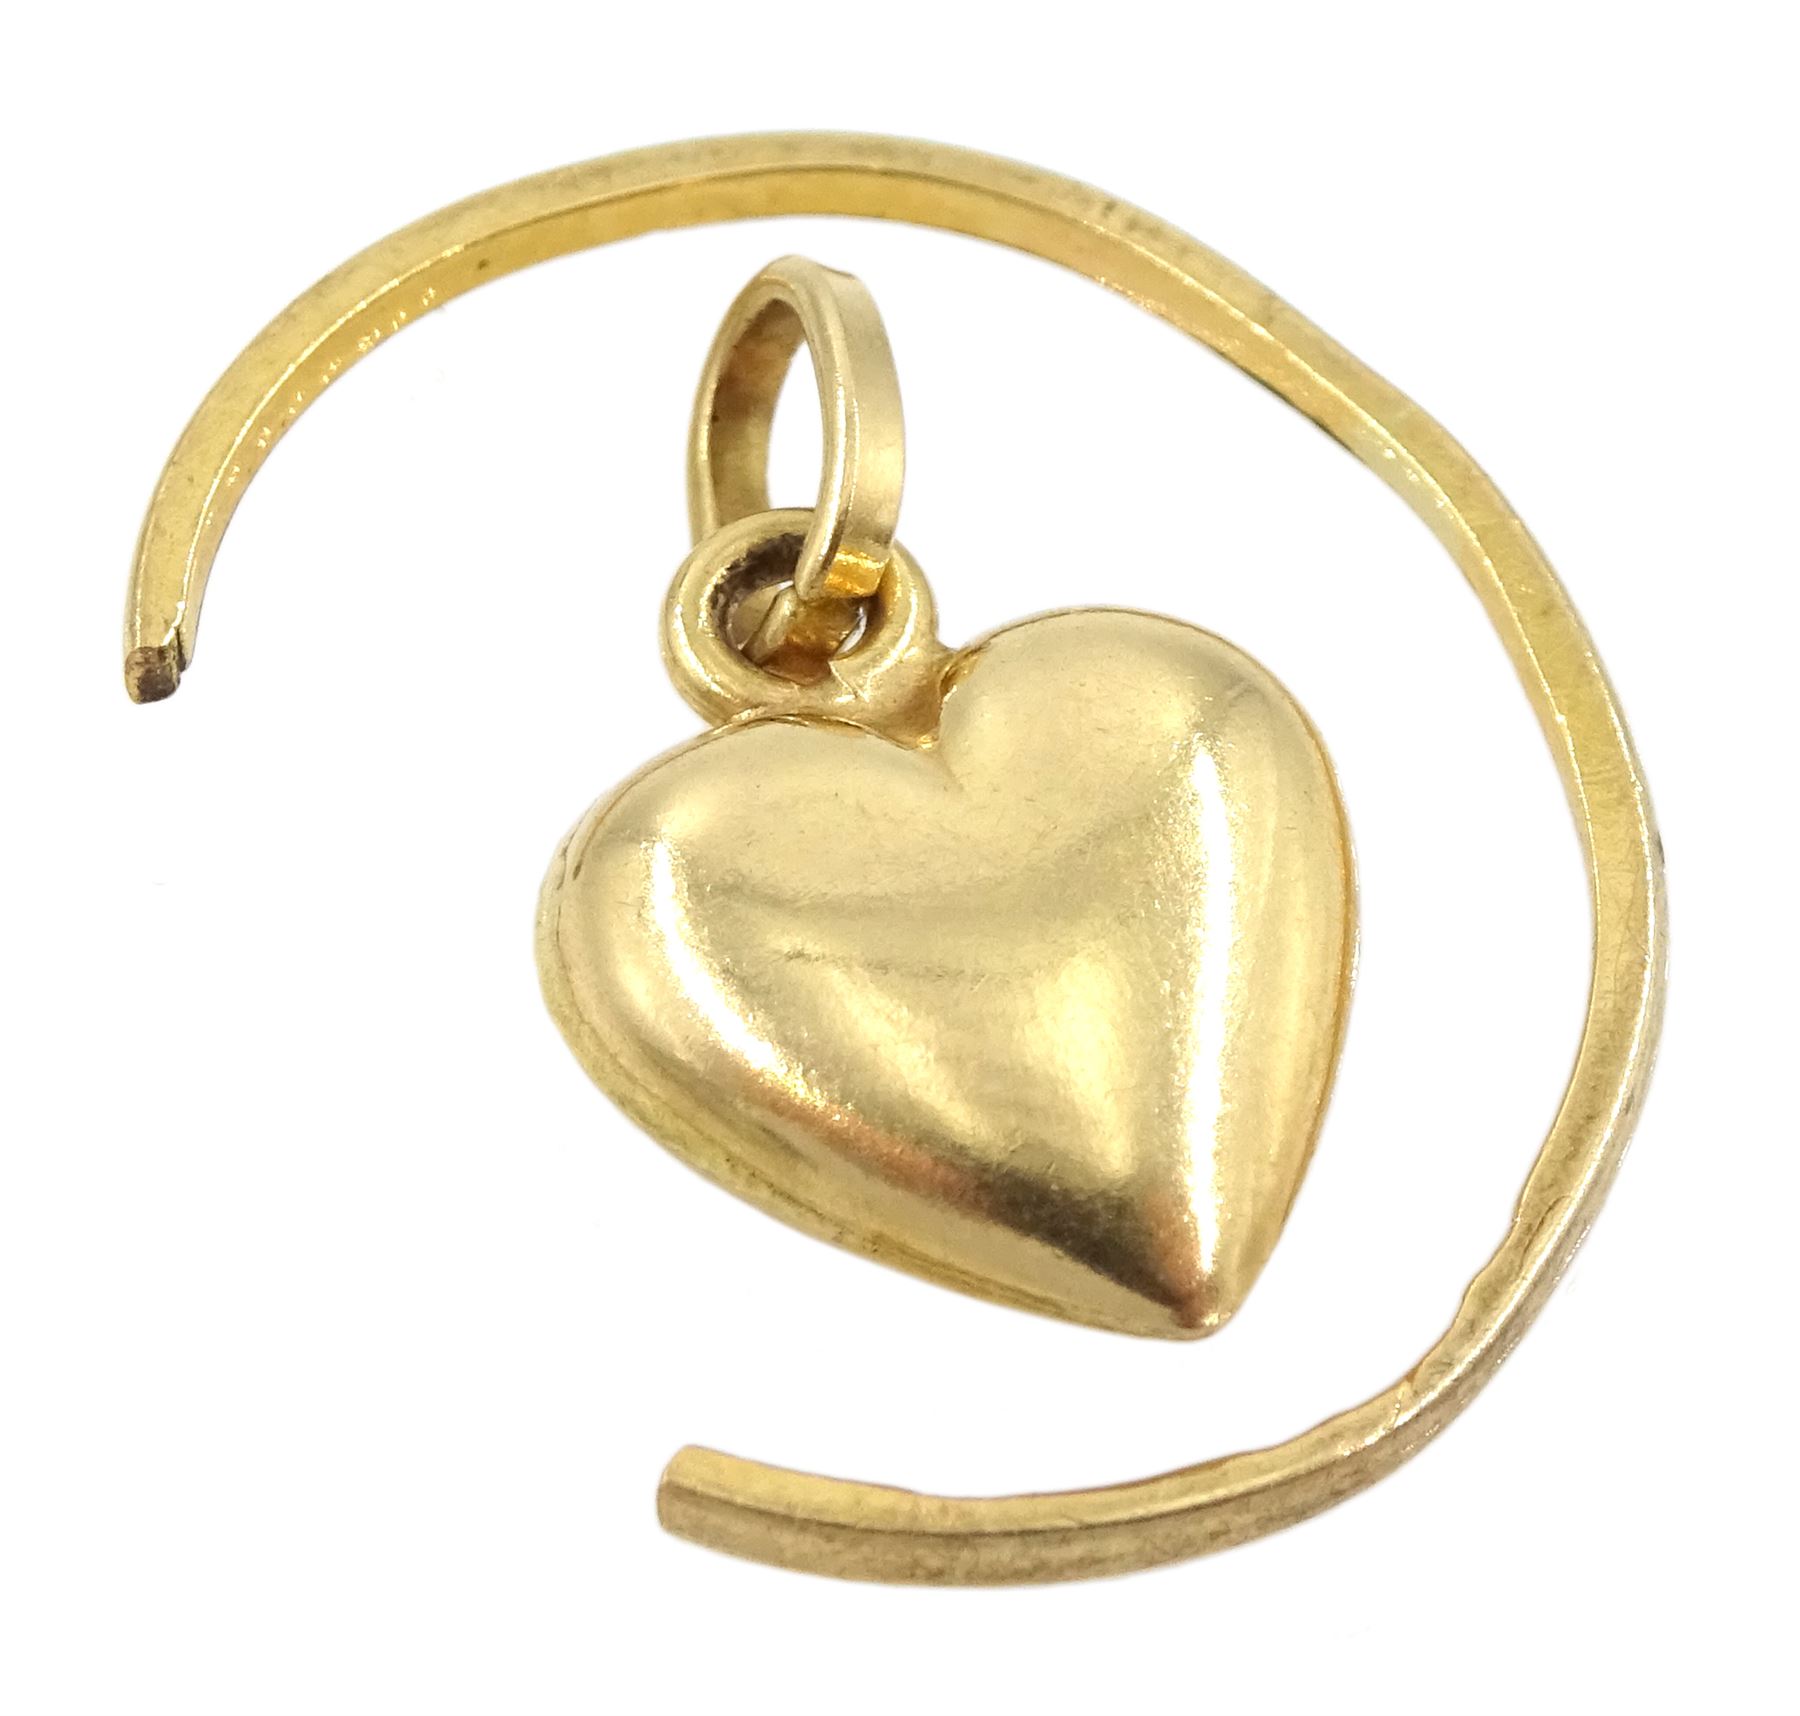 18ct gold heart pendant/charm stamped 18 and 22ct gold broken shank